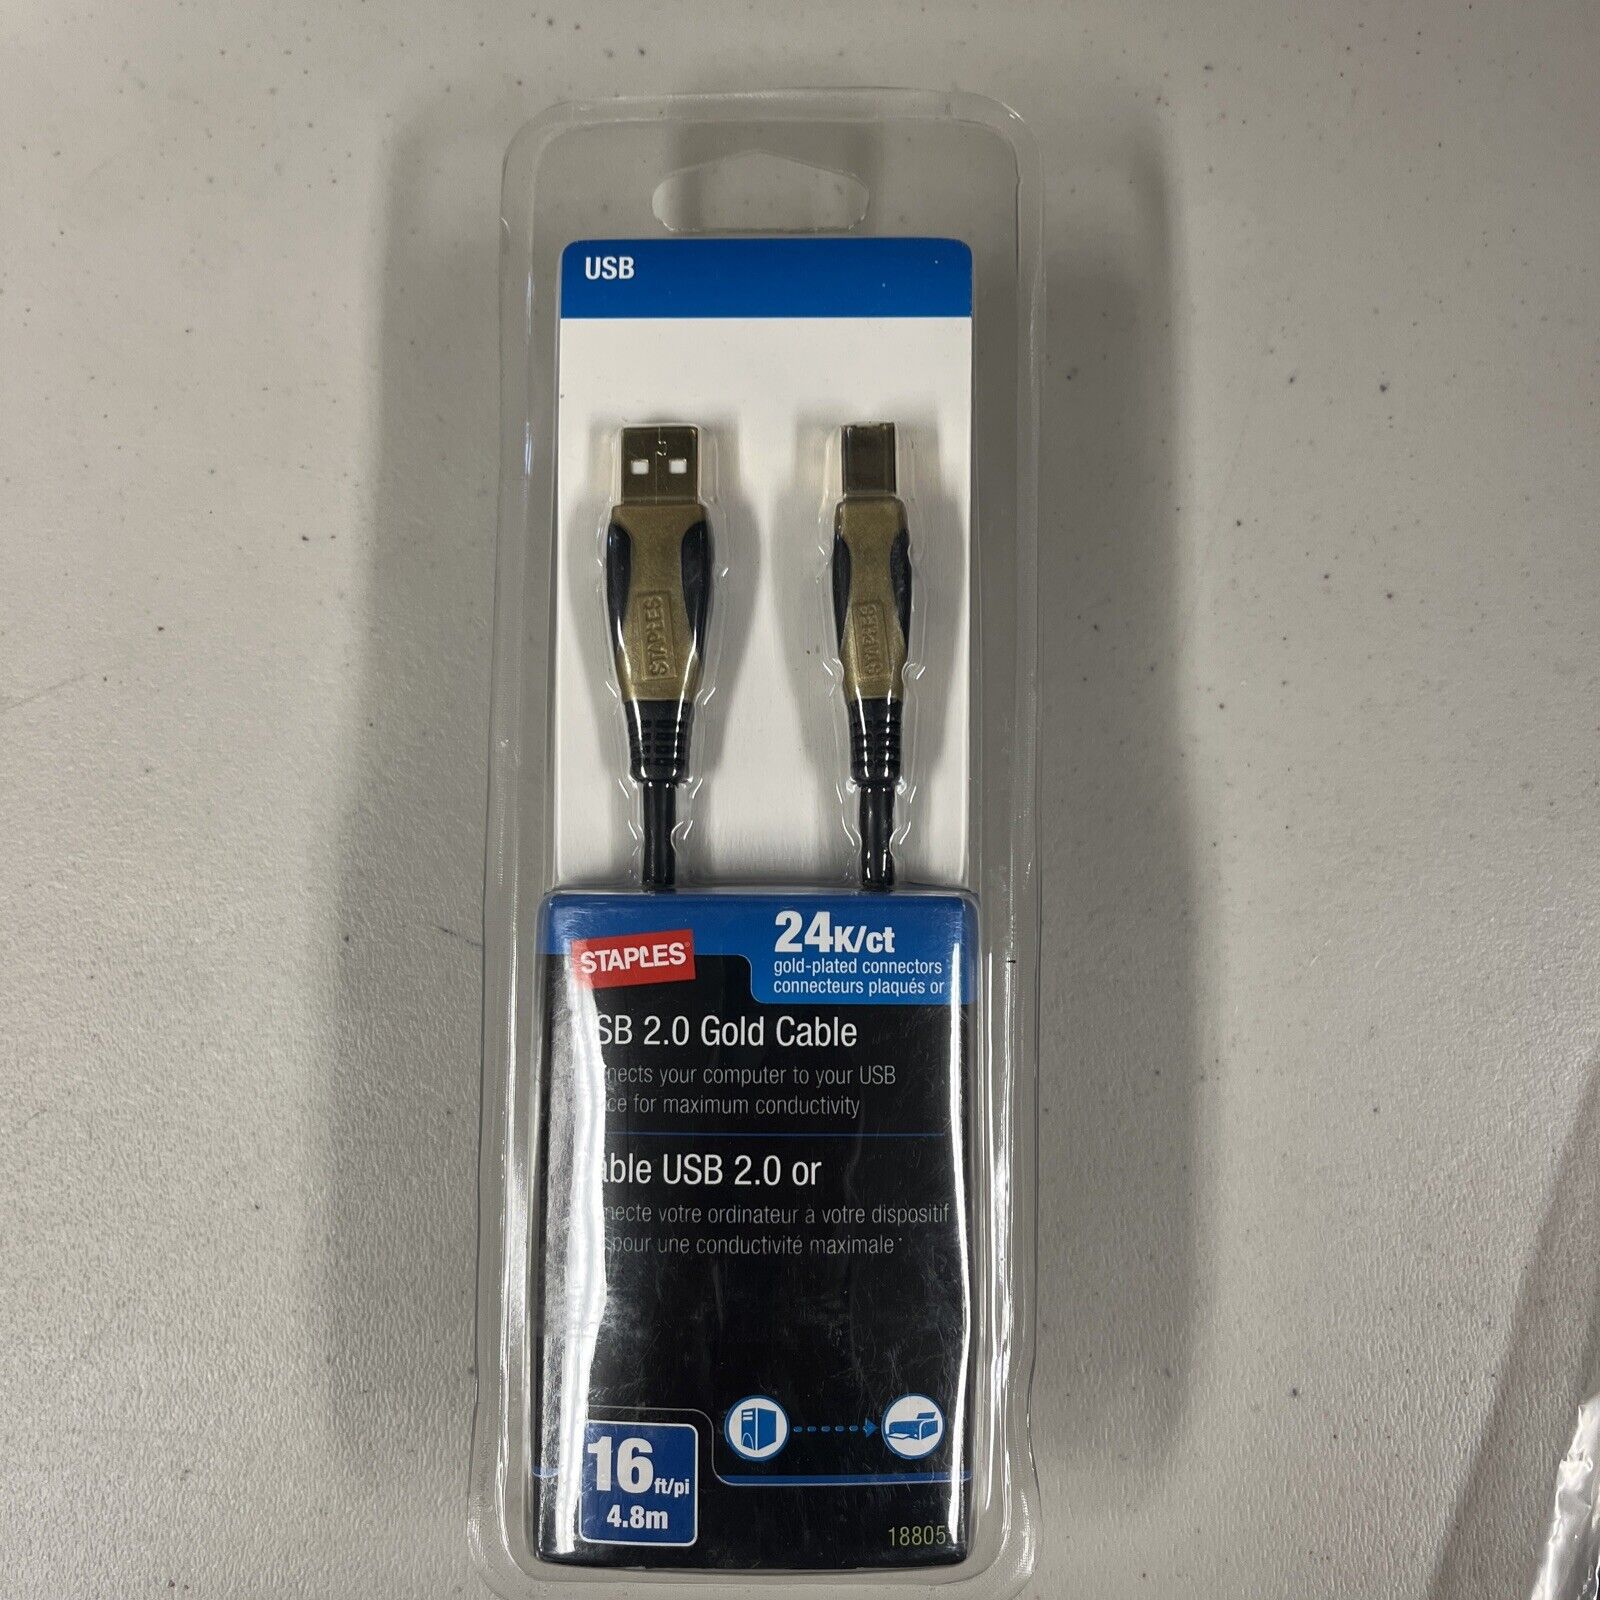 Staples USB 2.0 Gold Cable 24K/ct plated connectors #18805 